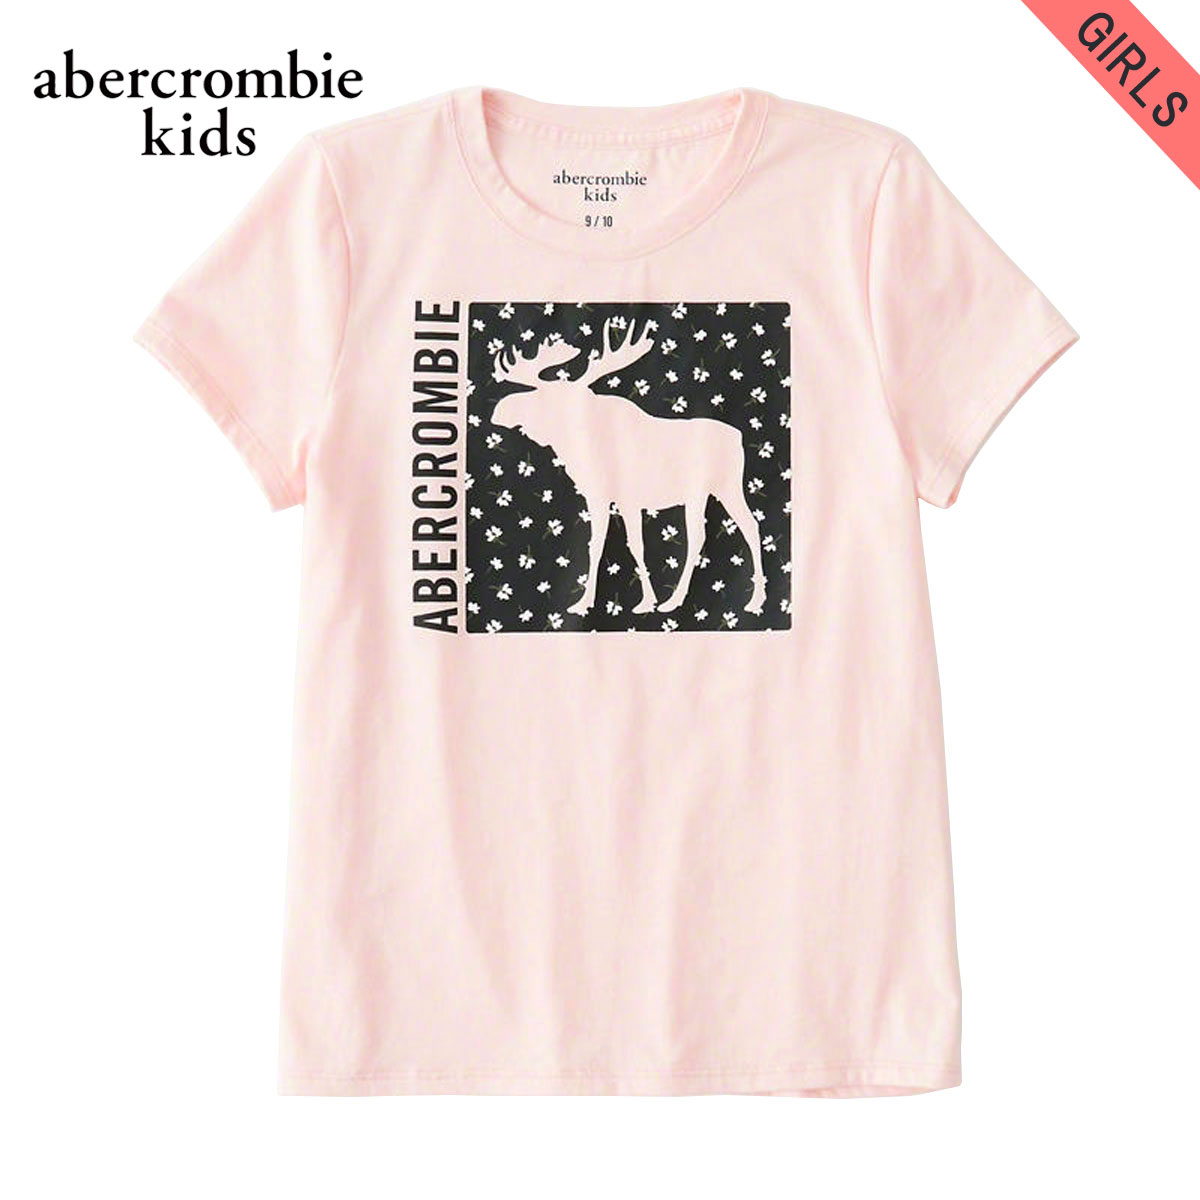 10%OFFクーポンセール 【利用期間 5/9 20:00～5/16 1:59】 アバクロキッズ Tシャツ 子供服 正規品 AbercrombieKids 半袖Tシャツ exploded icon tee 257-0891-0108-061